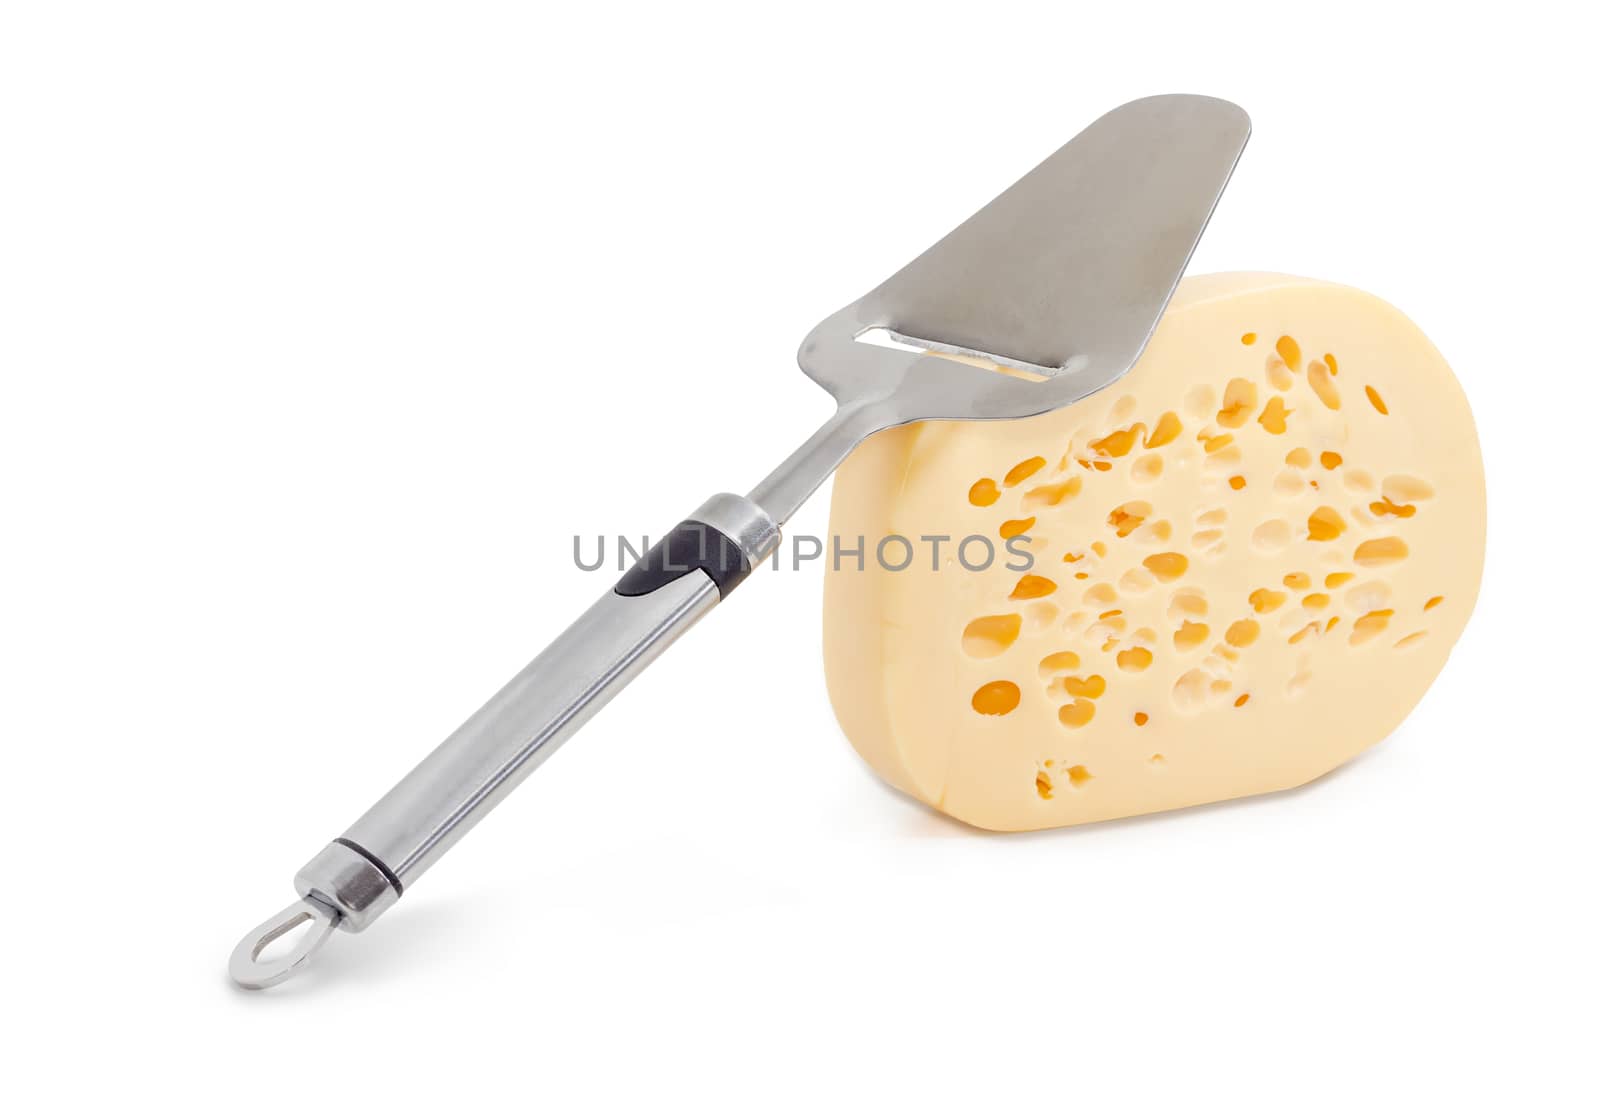 Cheese slicer on the piece of the semi-hard Swiss-type cheese on a light background
